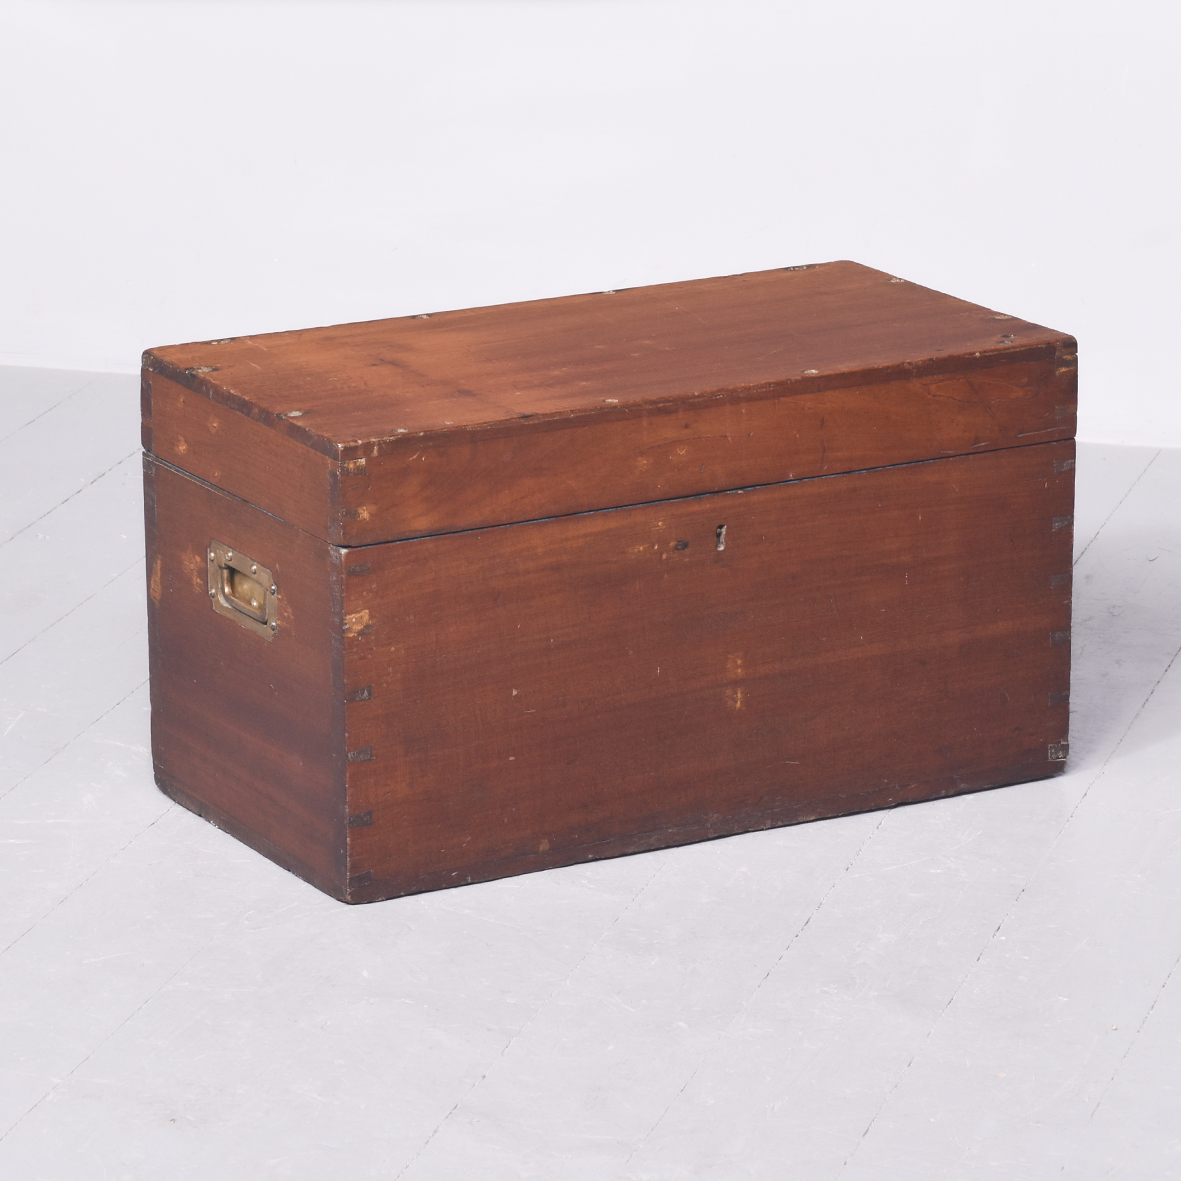 Neat-Sized, Victorian Solid Teak Military or Campaign Trunk campaign chest Antique Boxes 3